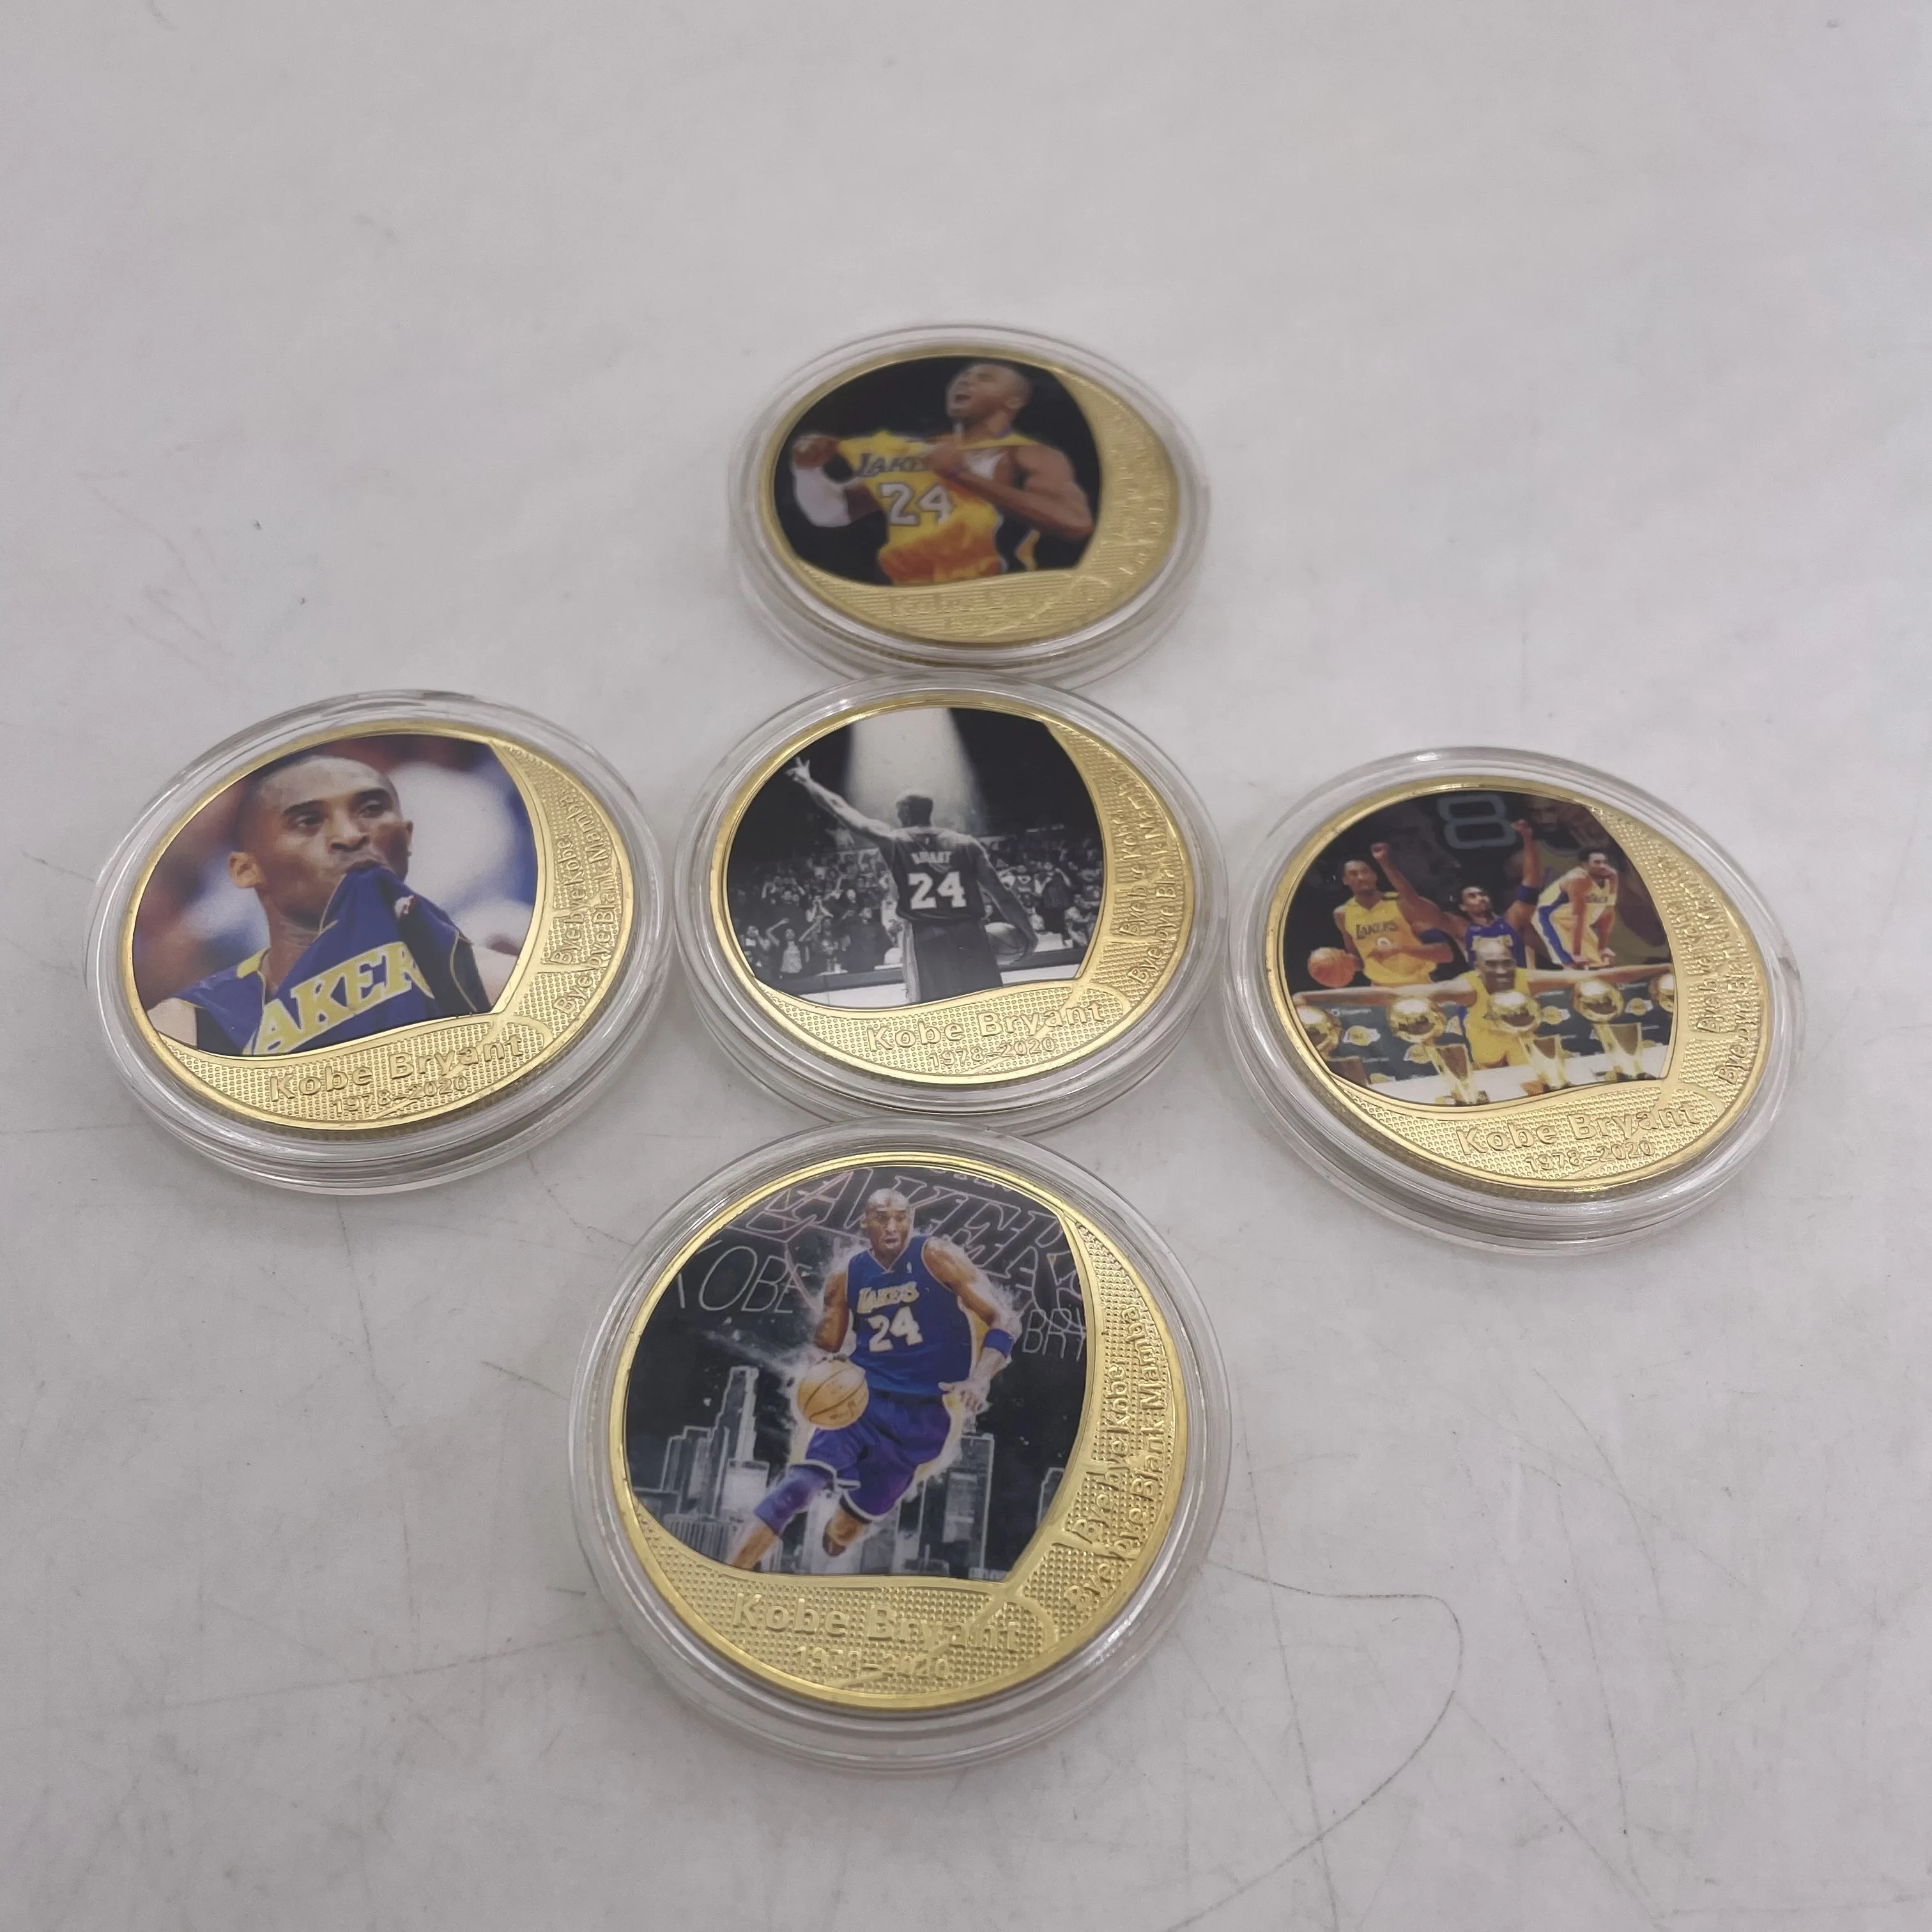 

Kobe Bryant Gold Collectible Coins Basketball Player Kobe Custom Challenge Coin Antique Original Coins Gift